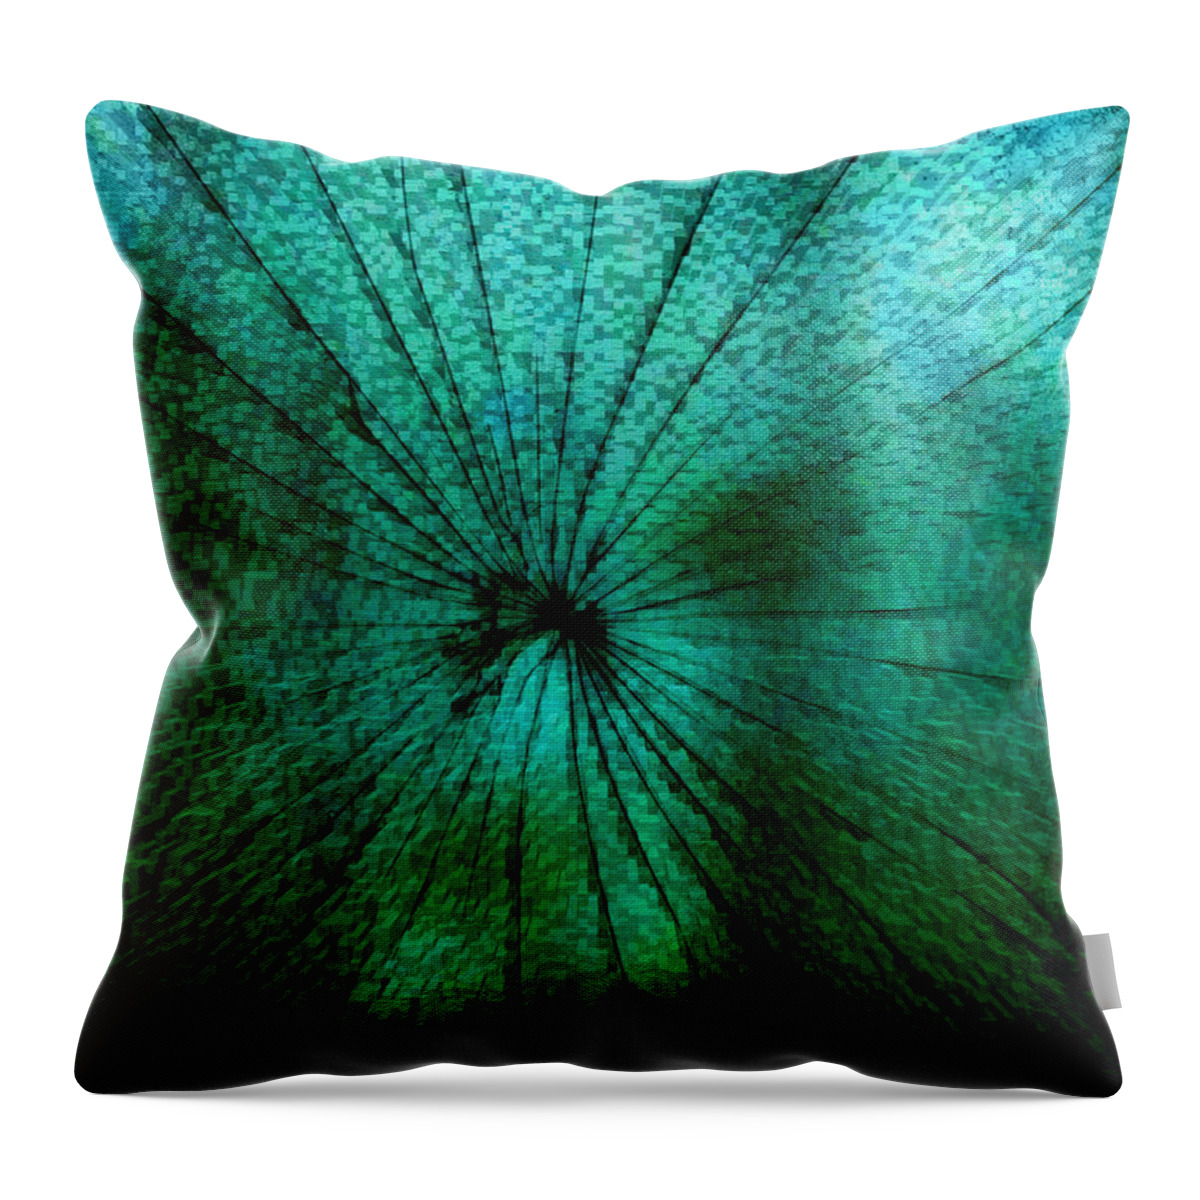 Abstract Throw Pillow featuring the photograph Glass Compromised by Steve Taylor